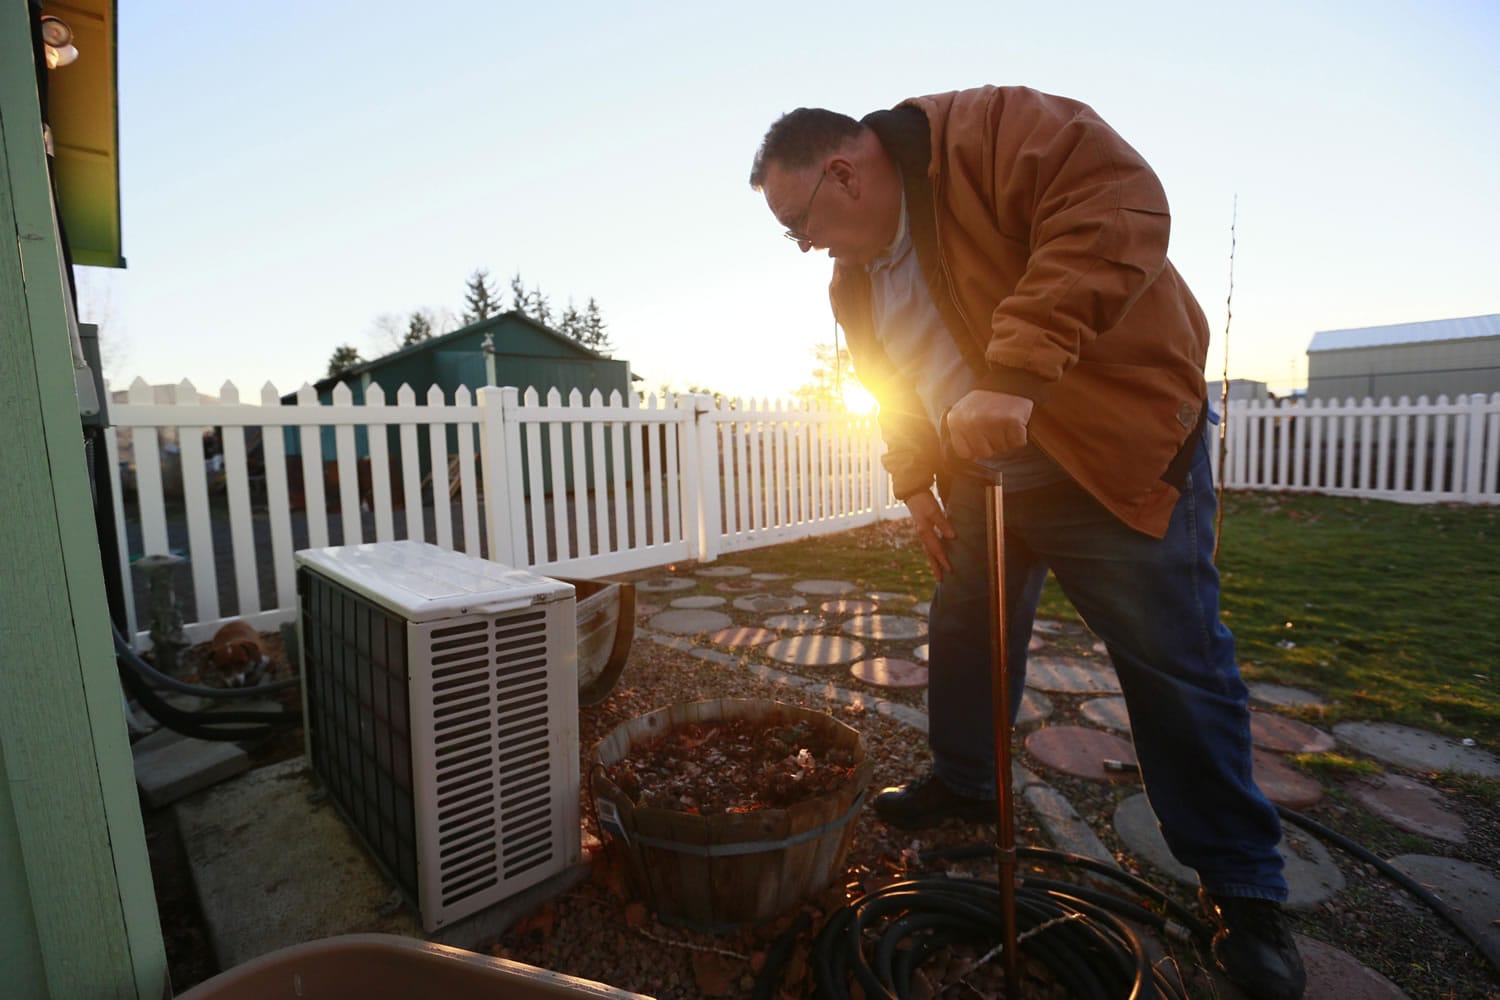 Harry Carman talks Wednesday about damage to his planters and around his heat pump from rabbits' digging at his Culver, Ore., home.